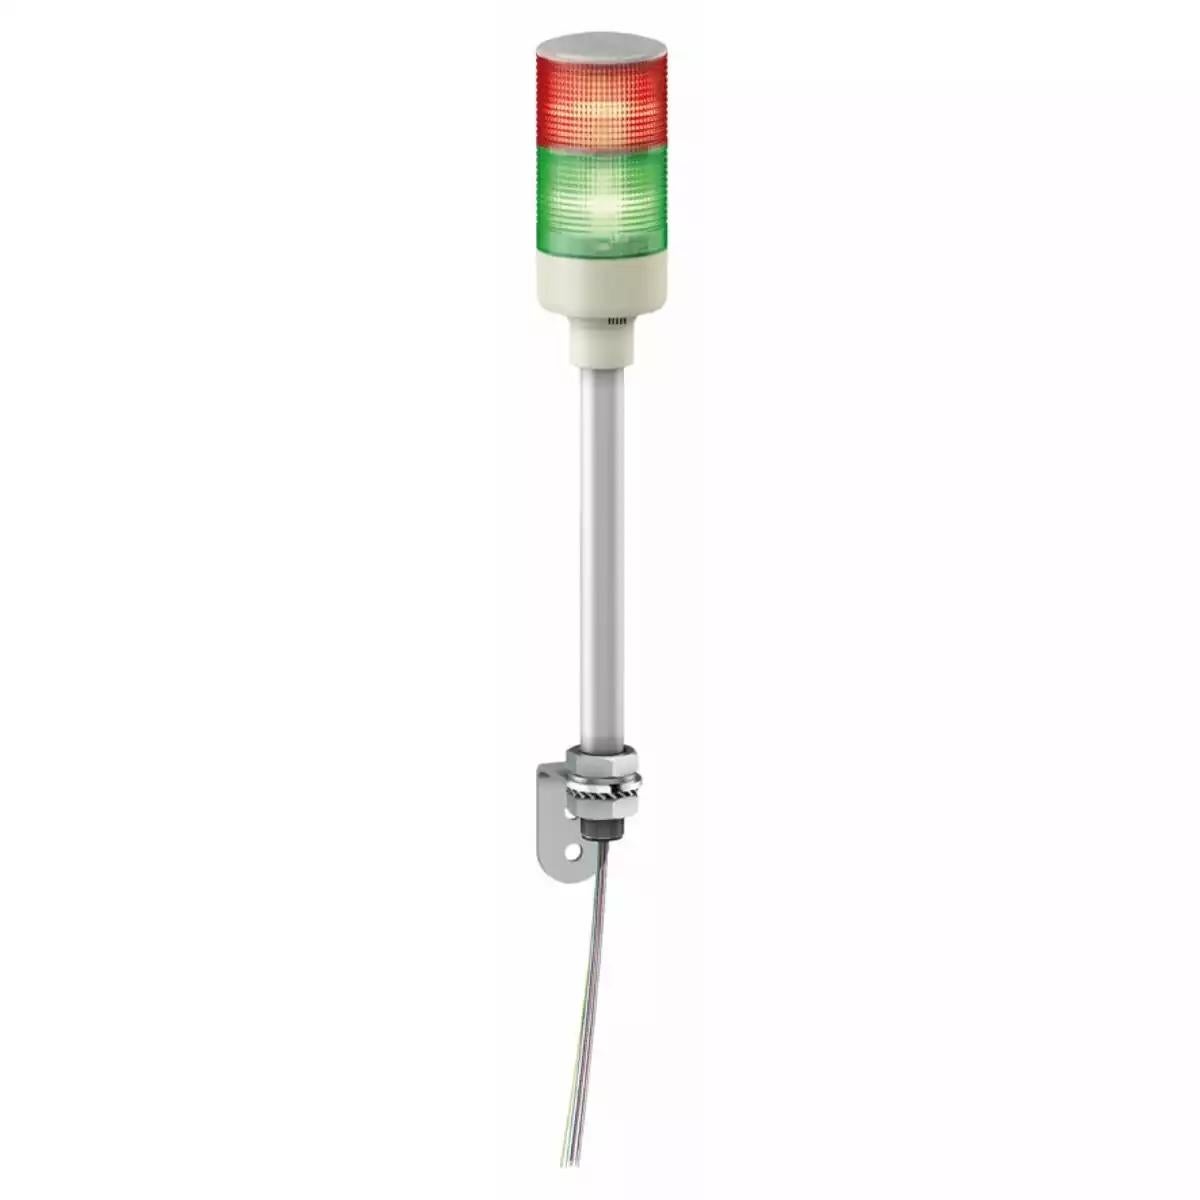 Schneider Electric Harmony XVG Tower Light - RG - 24V - LED - Tube mounting with 